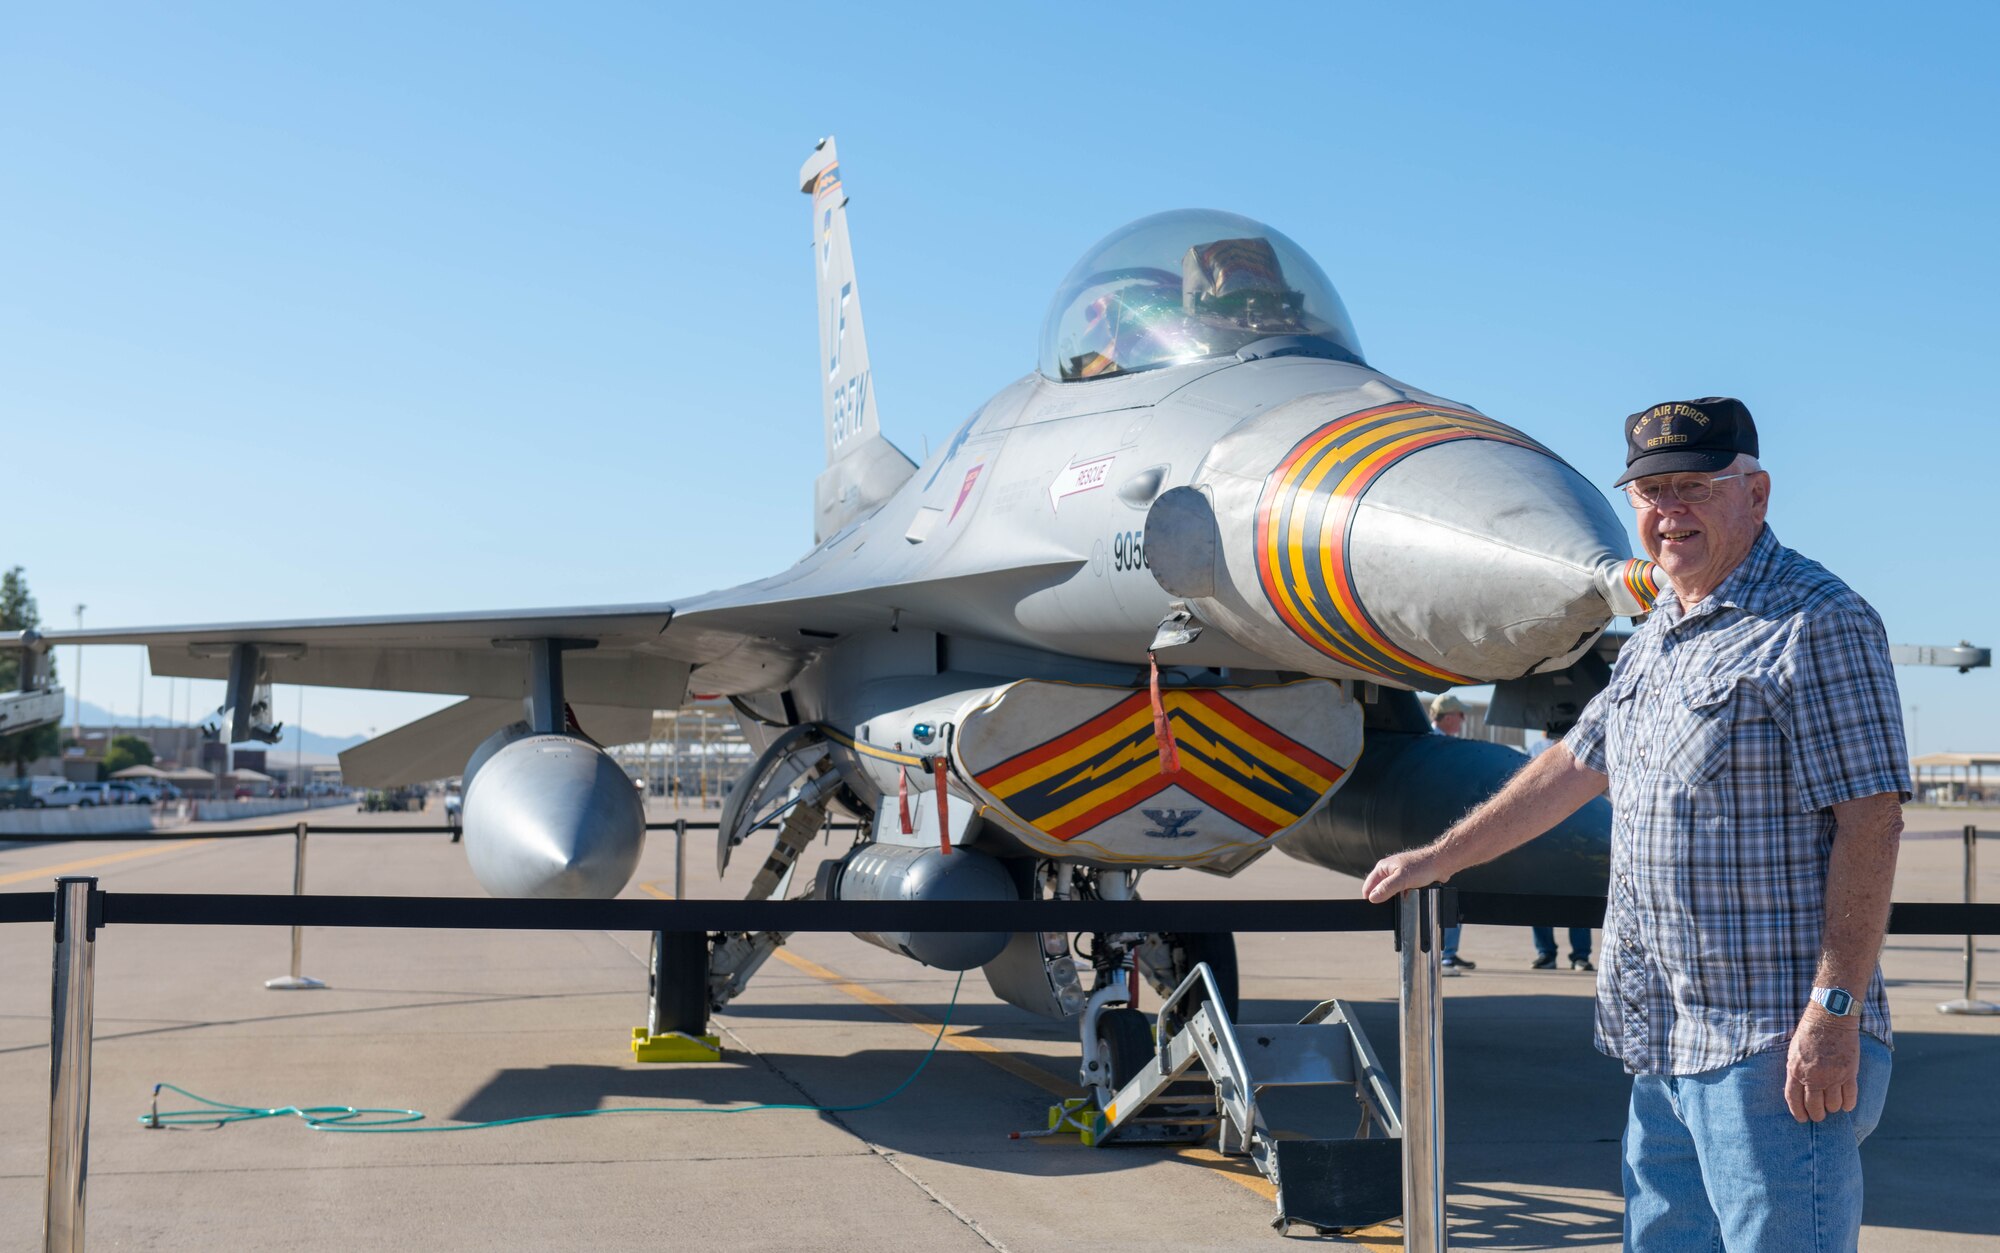 im Ritenour, retired Air Force member, poses in front of an F-16C Fighting Falcon during Retiree Appreciation Day (RAD), Oct. 26, 2019, at Luke Air Force Base, Ariz.